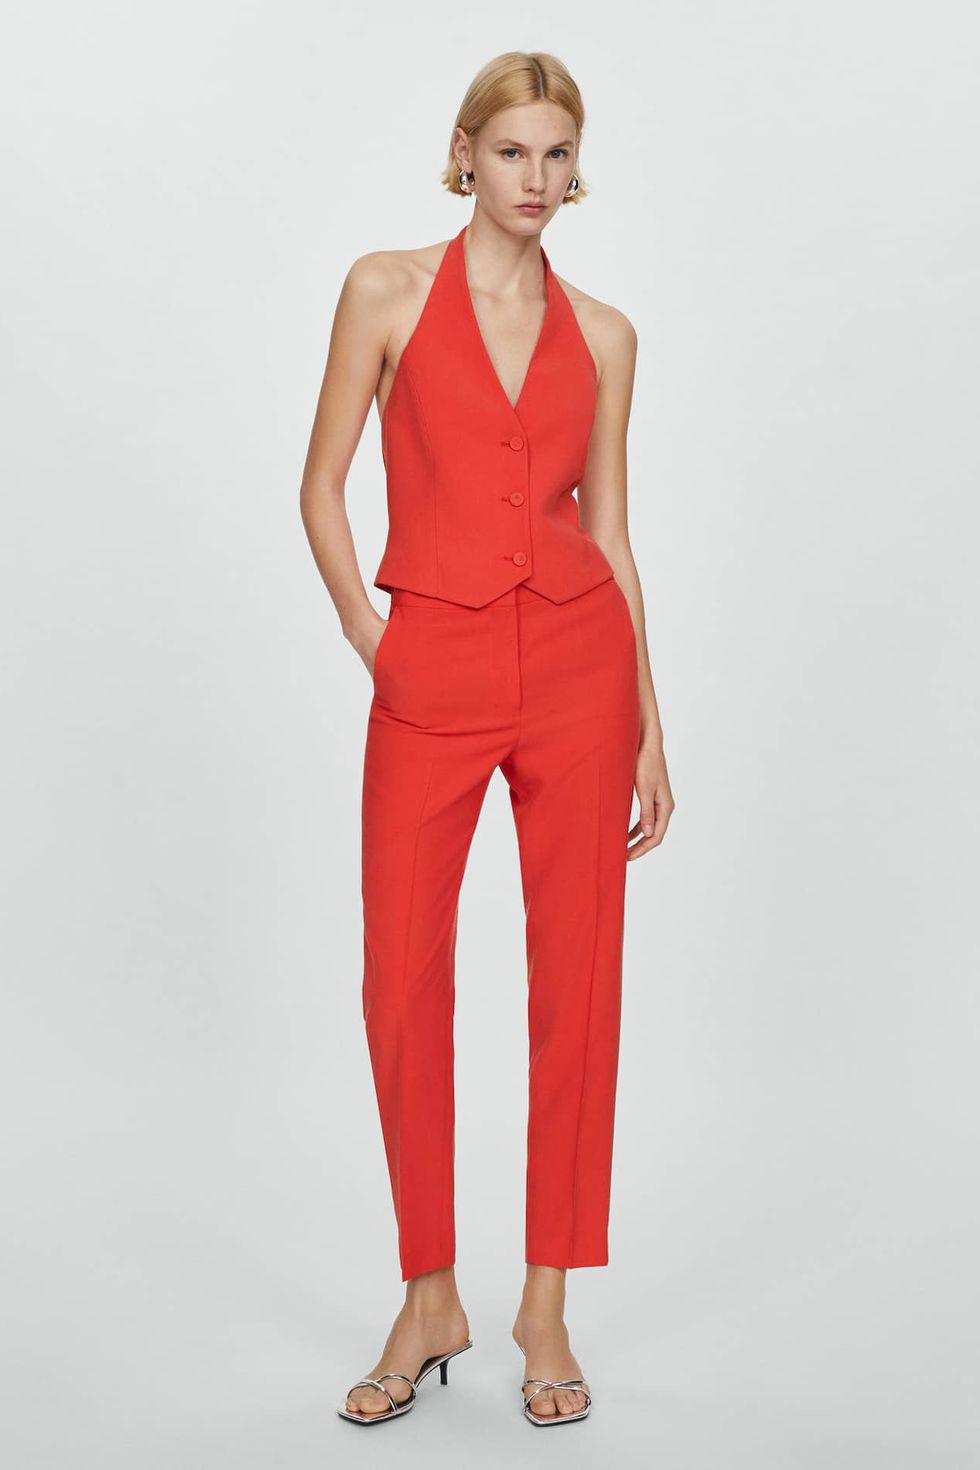 Red Bell Bottom Pants Suit Set With Red Blazer, Puffed Sleeve